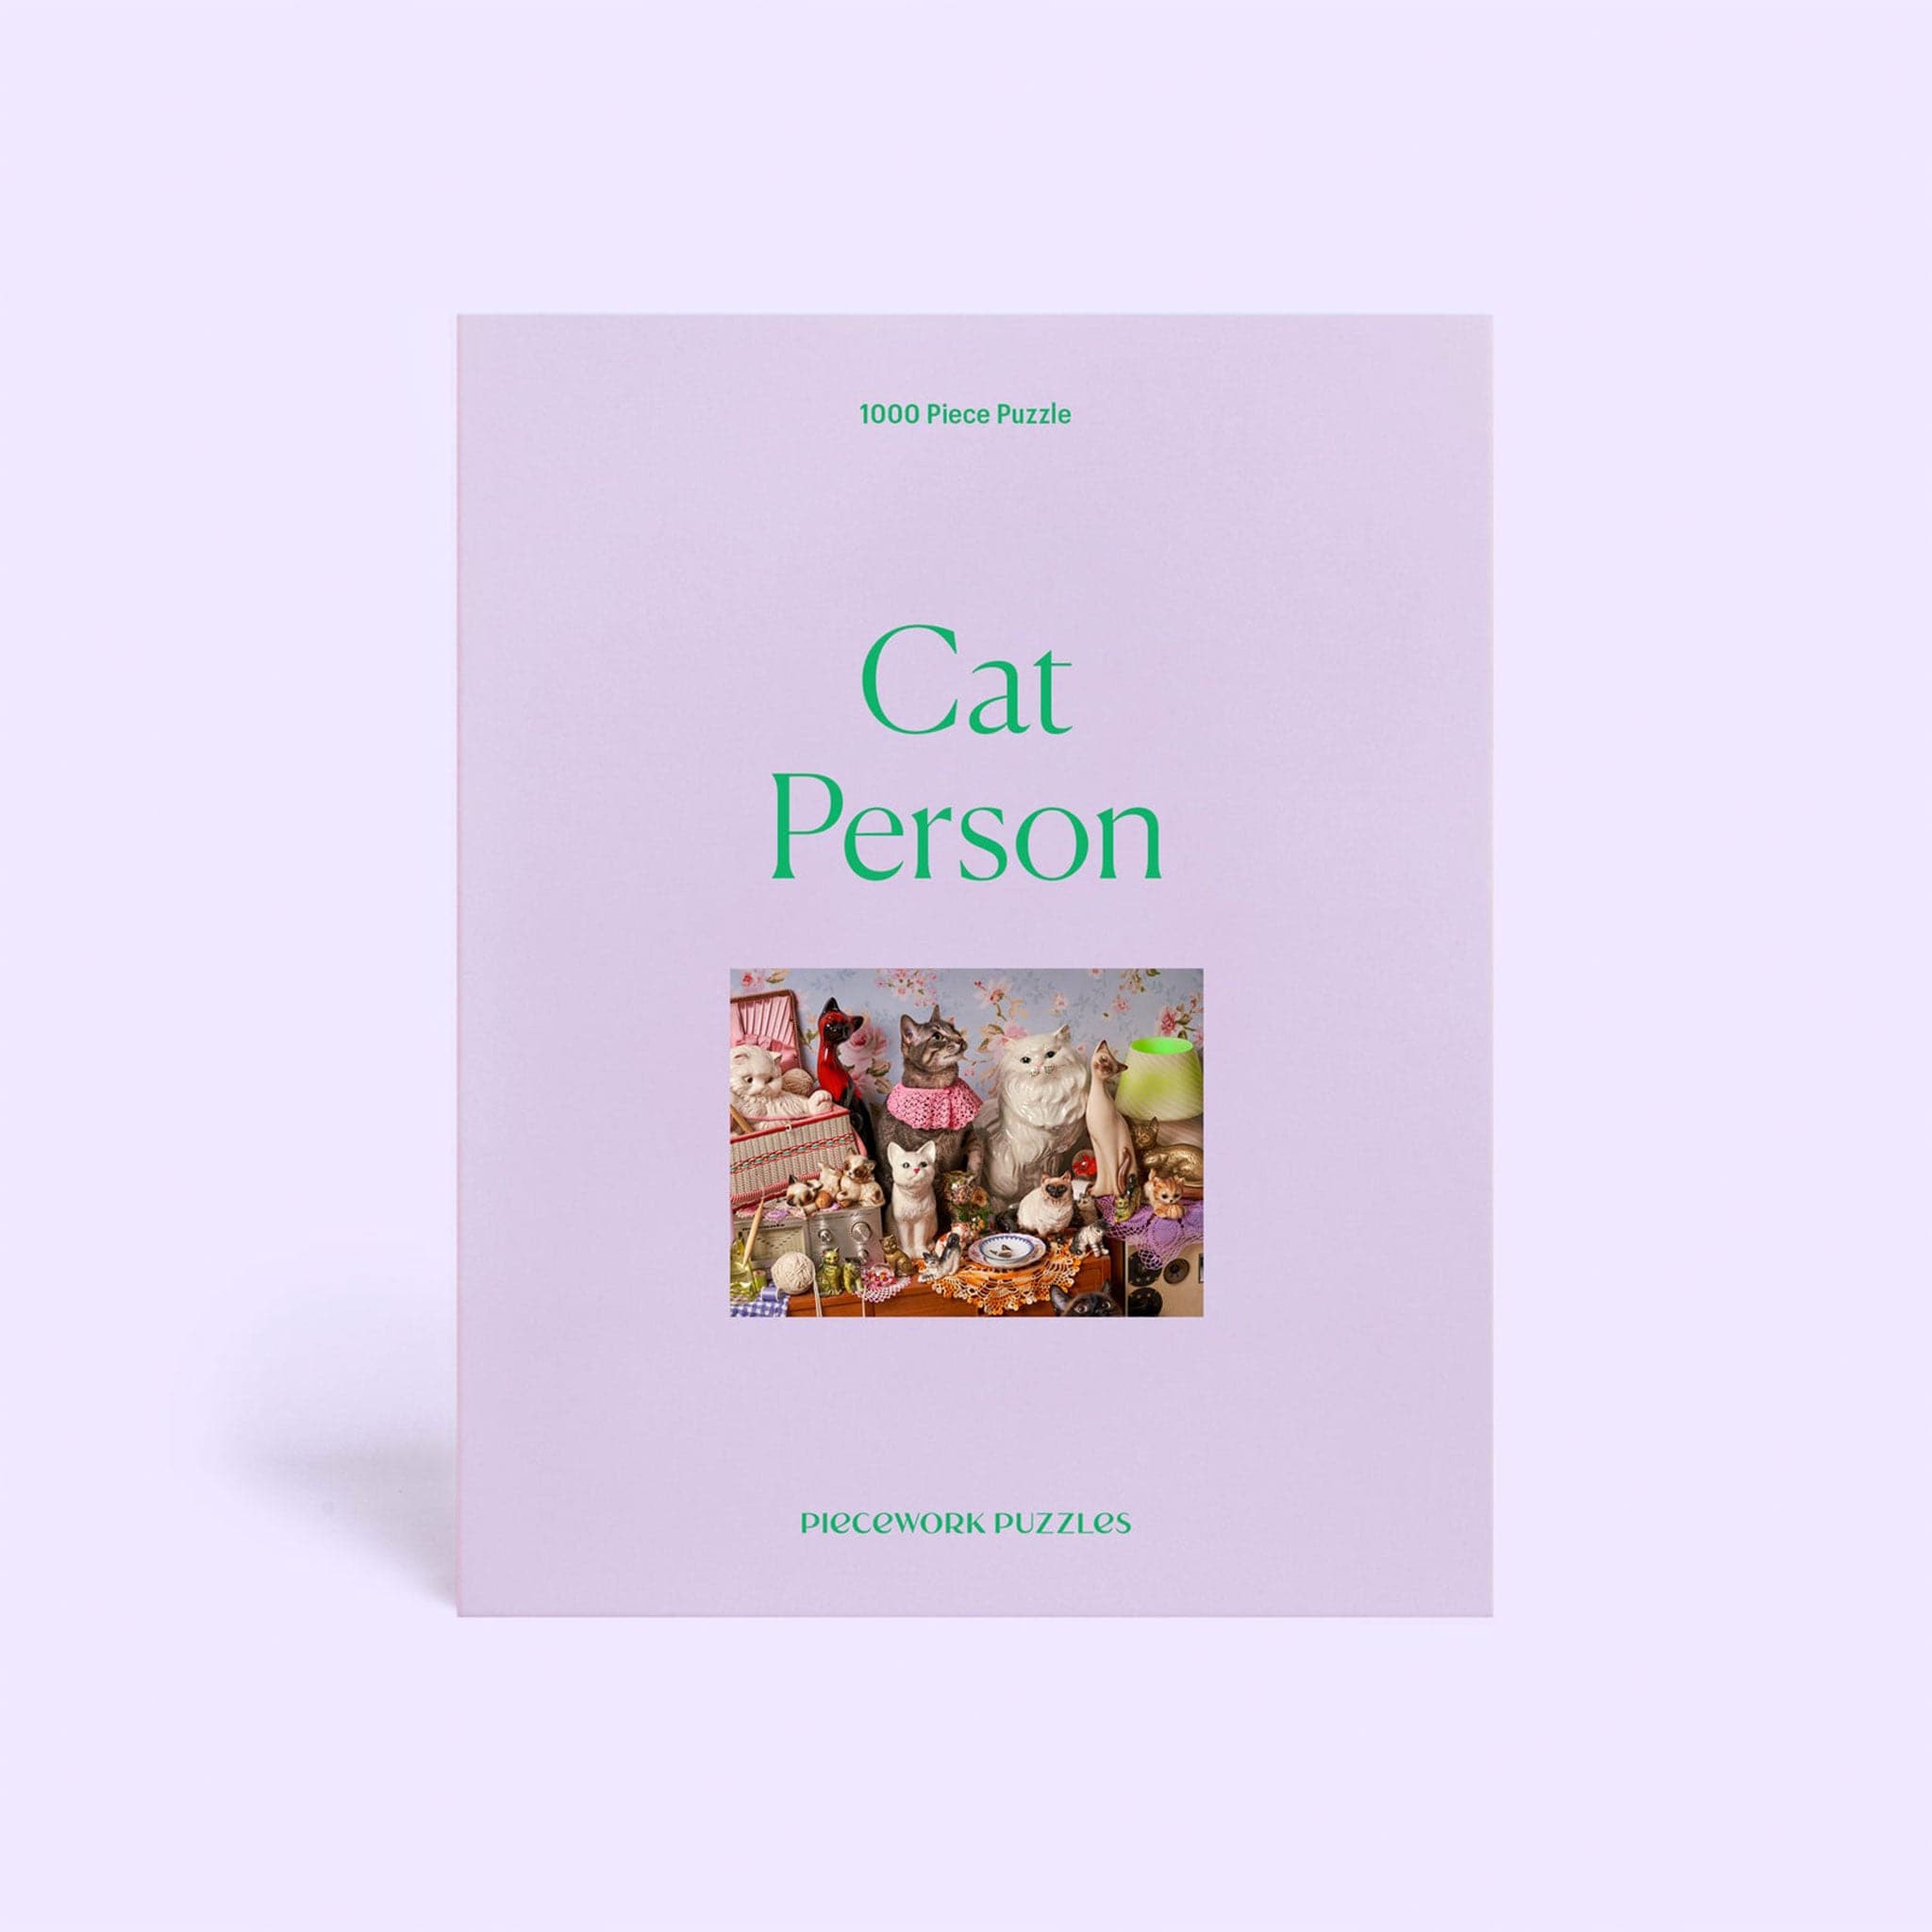 On a lavender background is a 1,000 piece puzzle box featuring the photo of the finished puzzle in the center along with green letters that read, "Cat Person Piecework Puzzles".